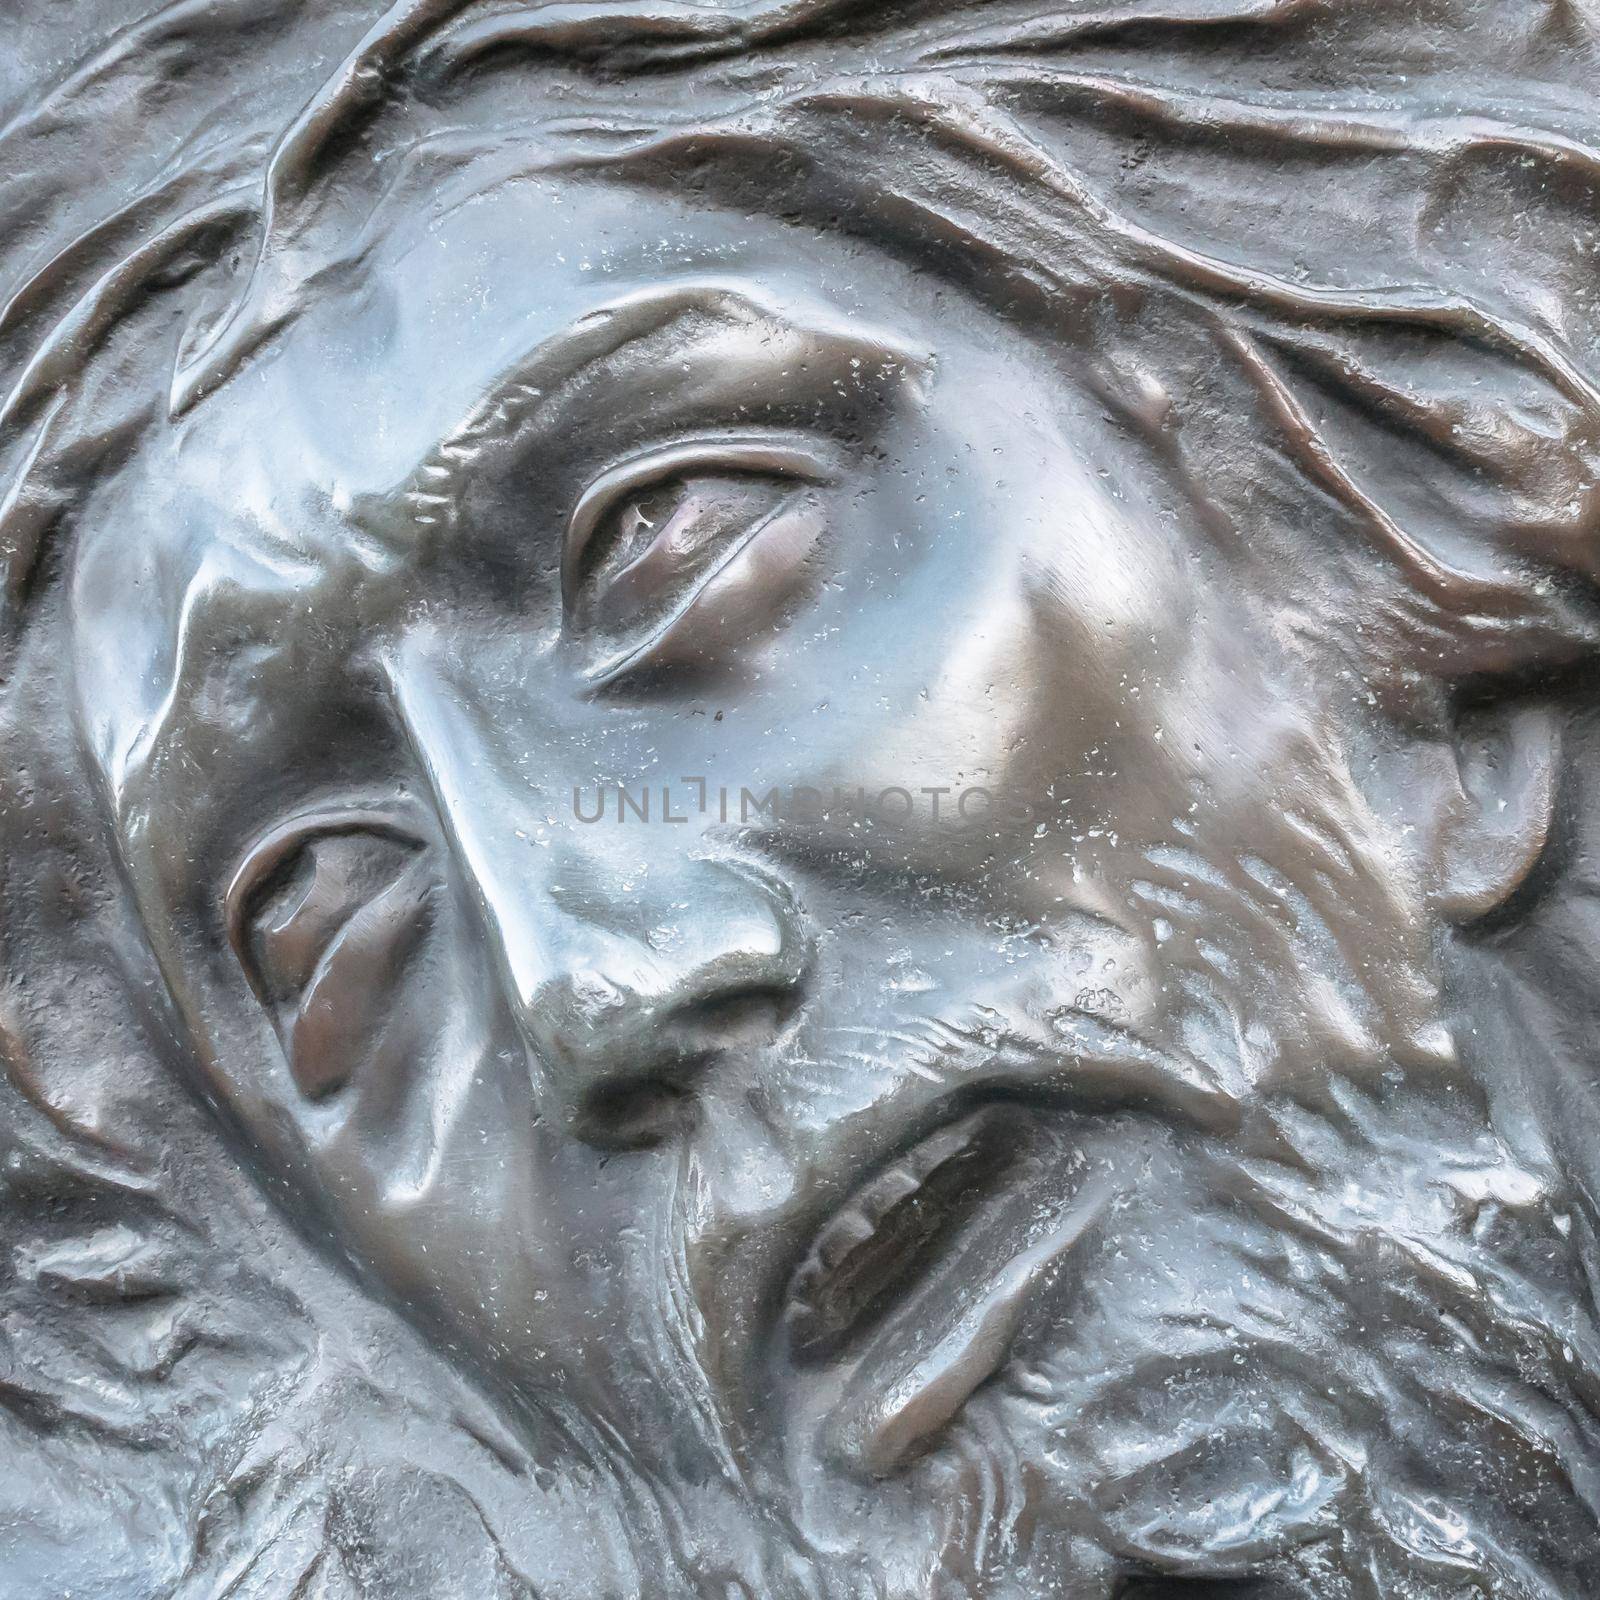 Bas-relief of Jesus crowned with thorns. High relief face of Jesus Christ with crown of thorns.